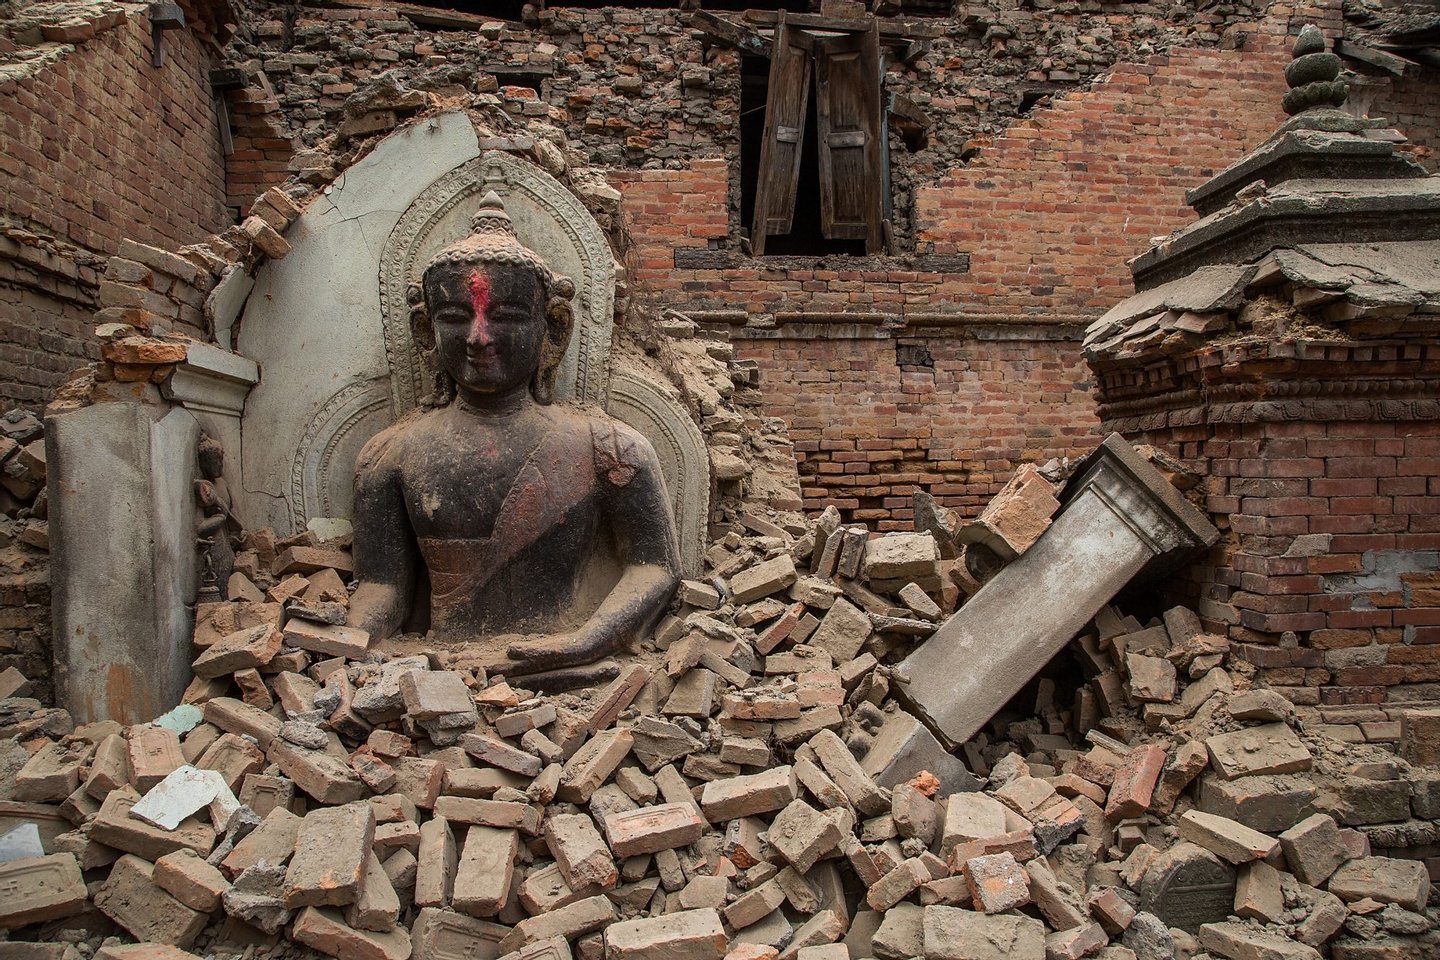 BHAKTAPUR, NEPAL - APRIL 26: A Buddha statue is surrounded by debris from a collapsed temple in the UNESCO world heritage site of Bhaktapur on April 26, 2015 in Bhaktapur, Nepal. A major 7.8 earthquake hit Kathmandu mid-day on Saturday, and was followed by multiple aftershocks that triggered avalanches on Mt. Everest that buried mountain climbers in their base camps. Many houses, buildings and temples in the capital were destroyed during the earthquake, leaving thousands dead or trapped under the debris as emergency rescue workers attempt to clear debris and find survivors. (Photo by Omar Havana/Getty Images)